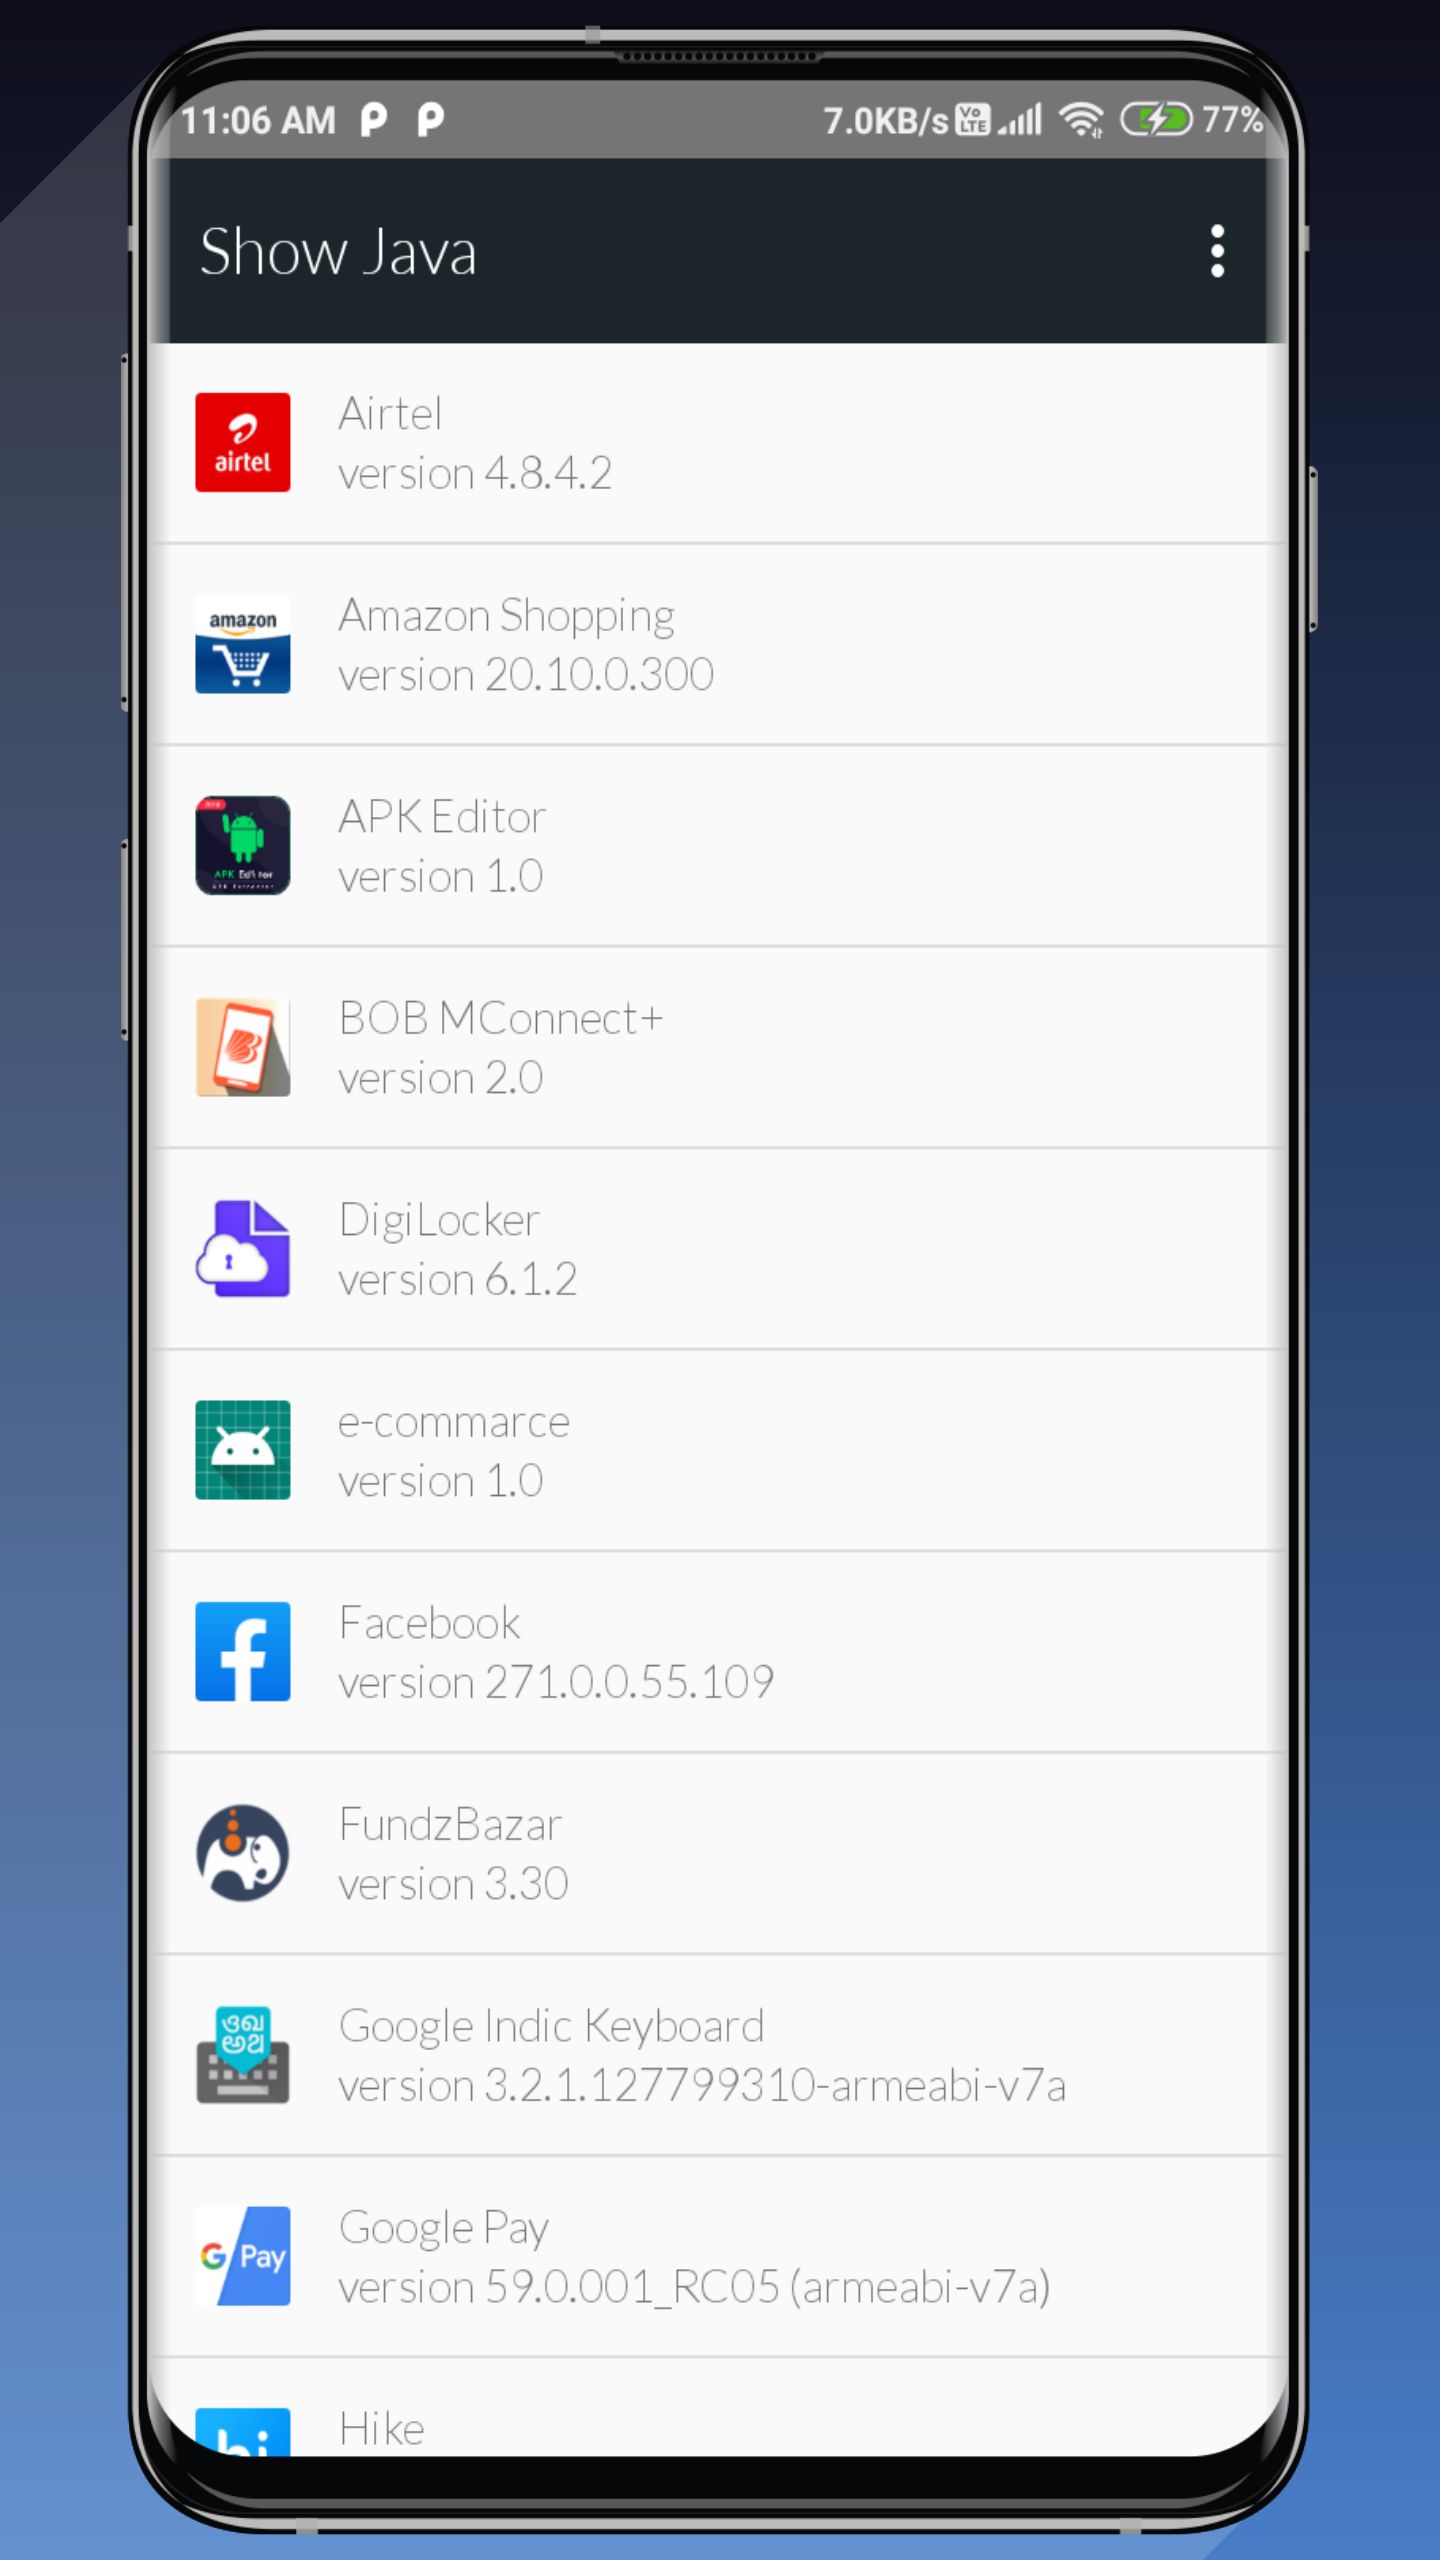 APK Editor Android Source Code by CodersApps Codester